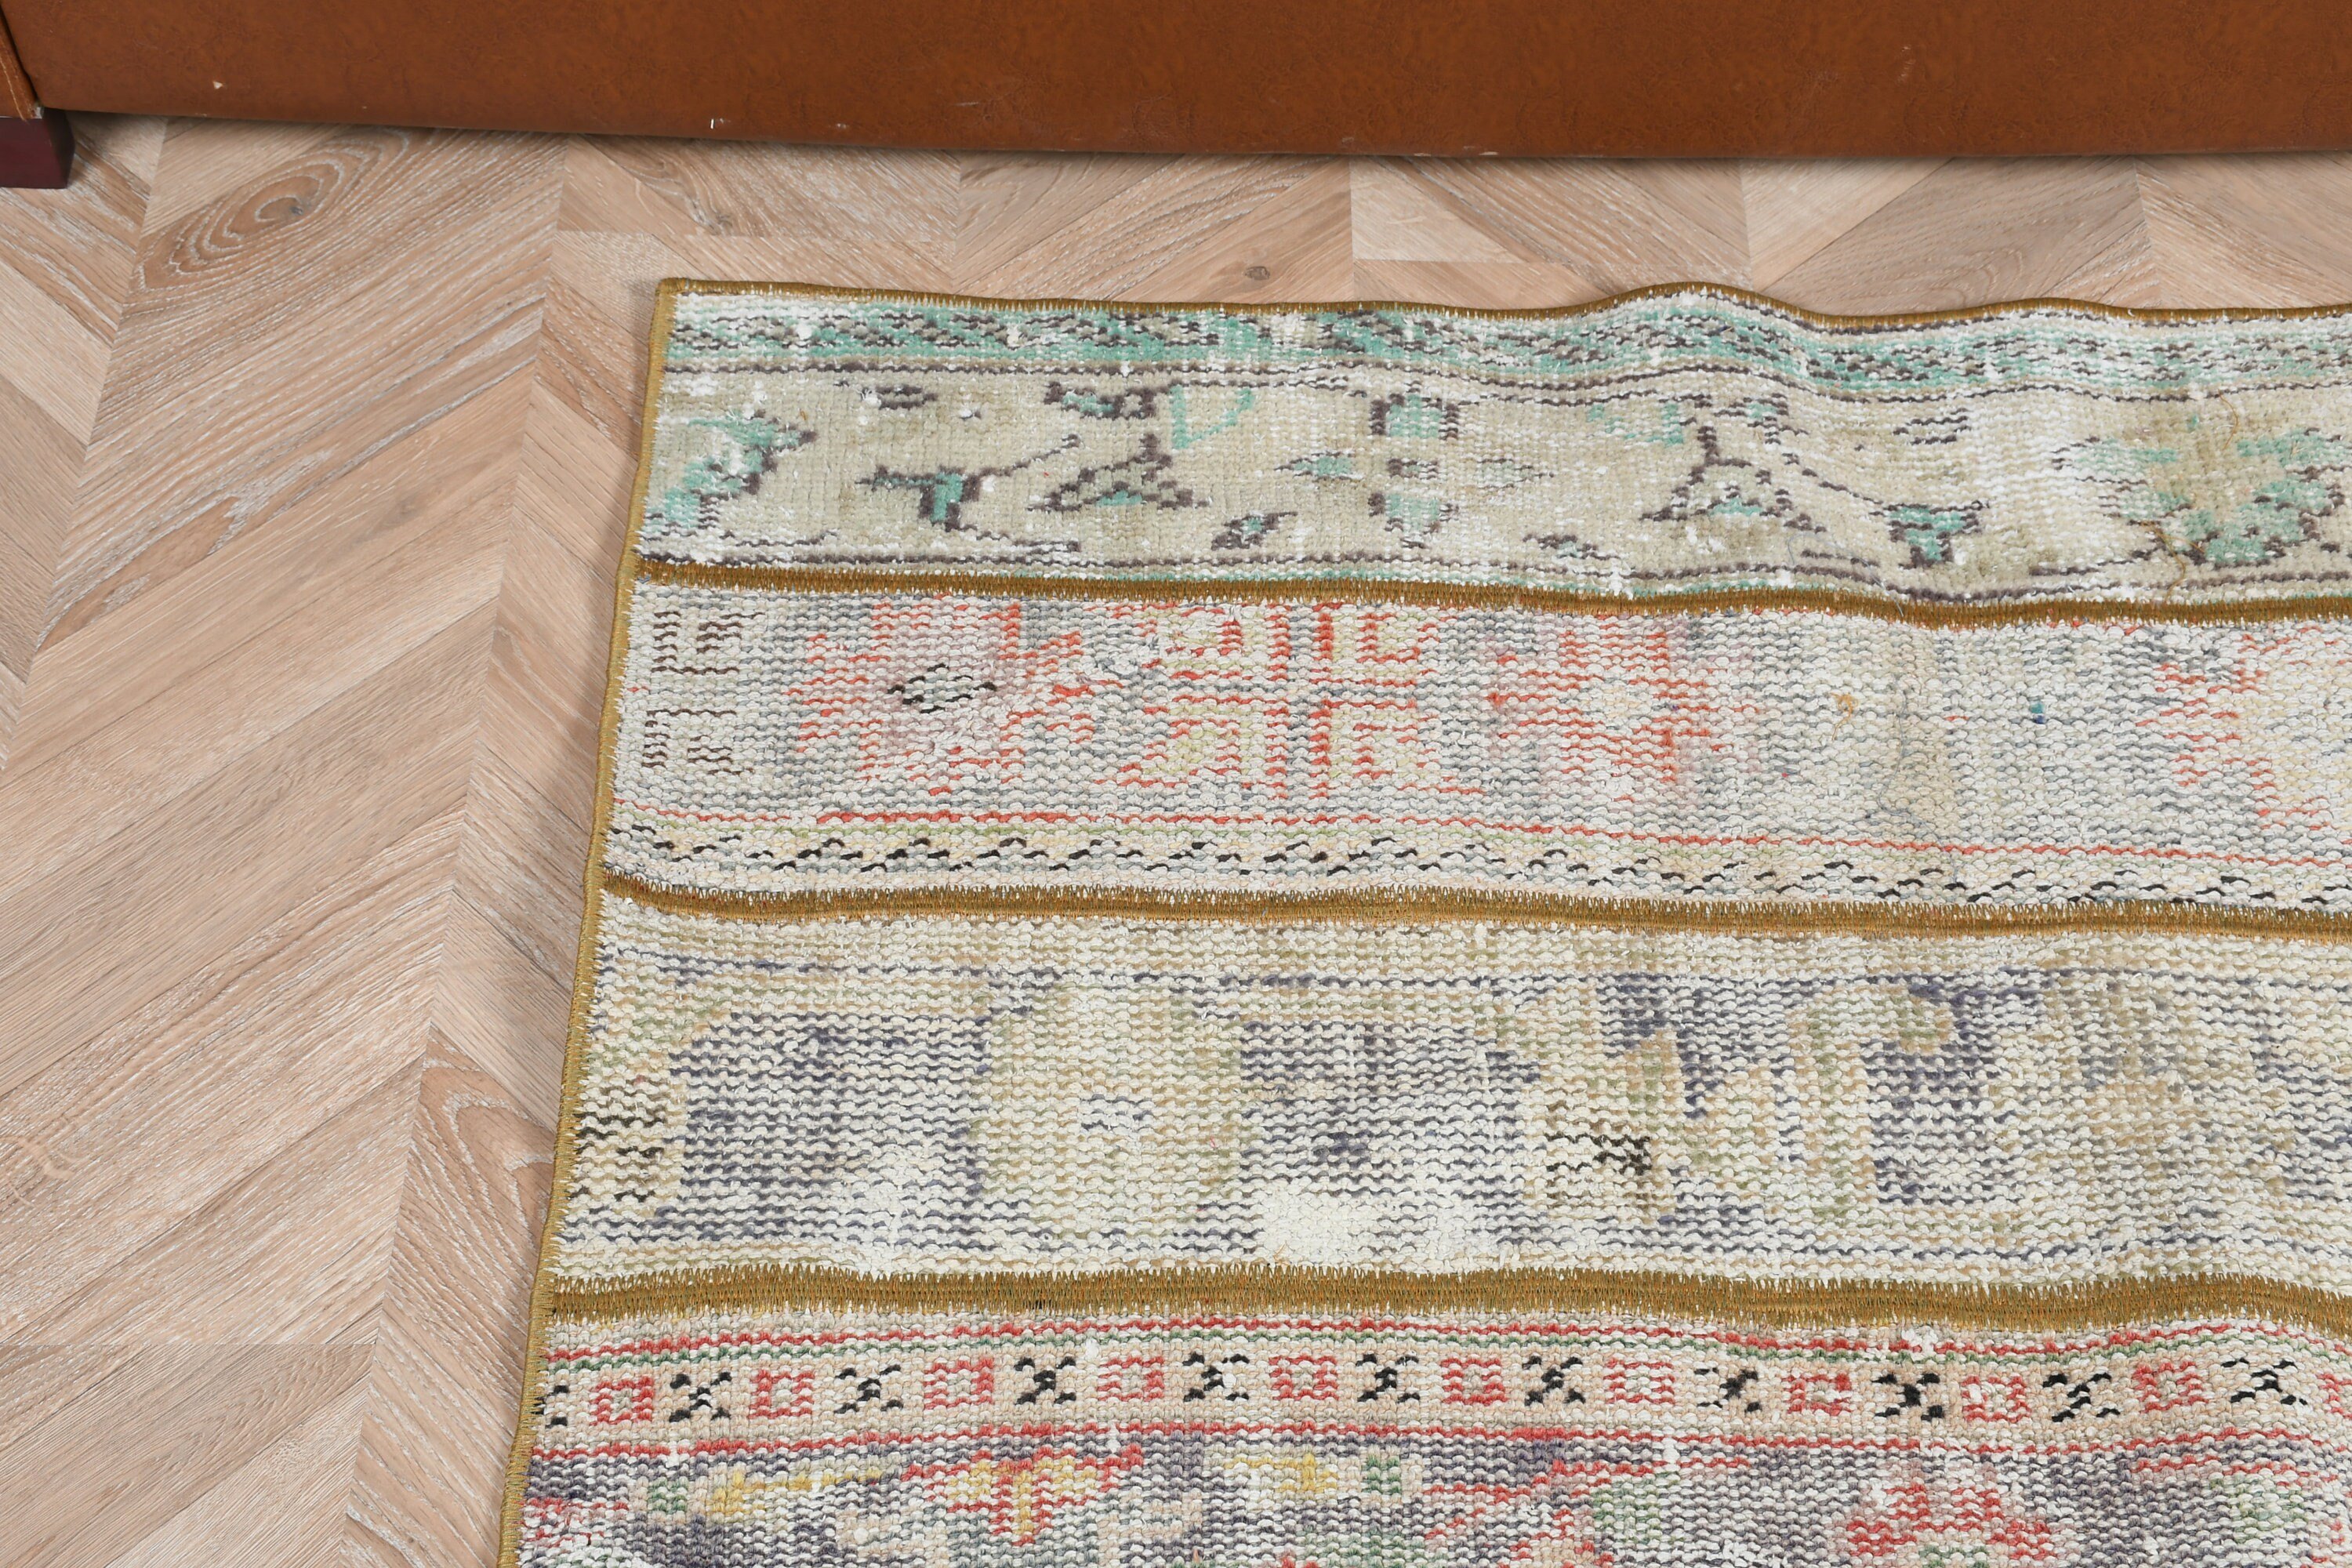 Oushak Rugs, Turkish Rugs, Kitchen Rugs, Beige Oushak Rug, Rugs for Bedroom, 2.2x3.9 ft Small Rugs, Vintage Rugs, Entry Rug